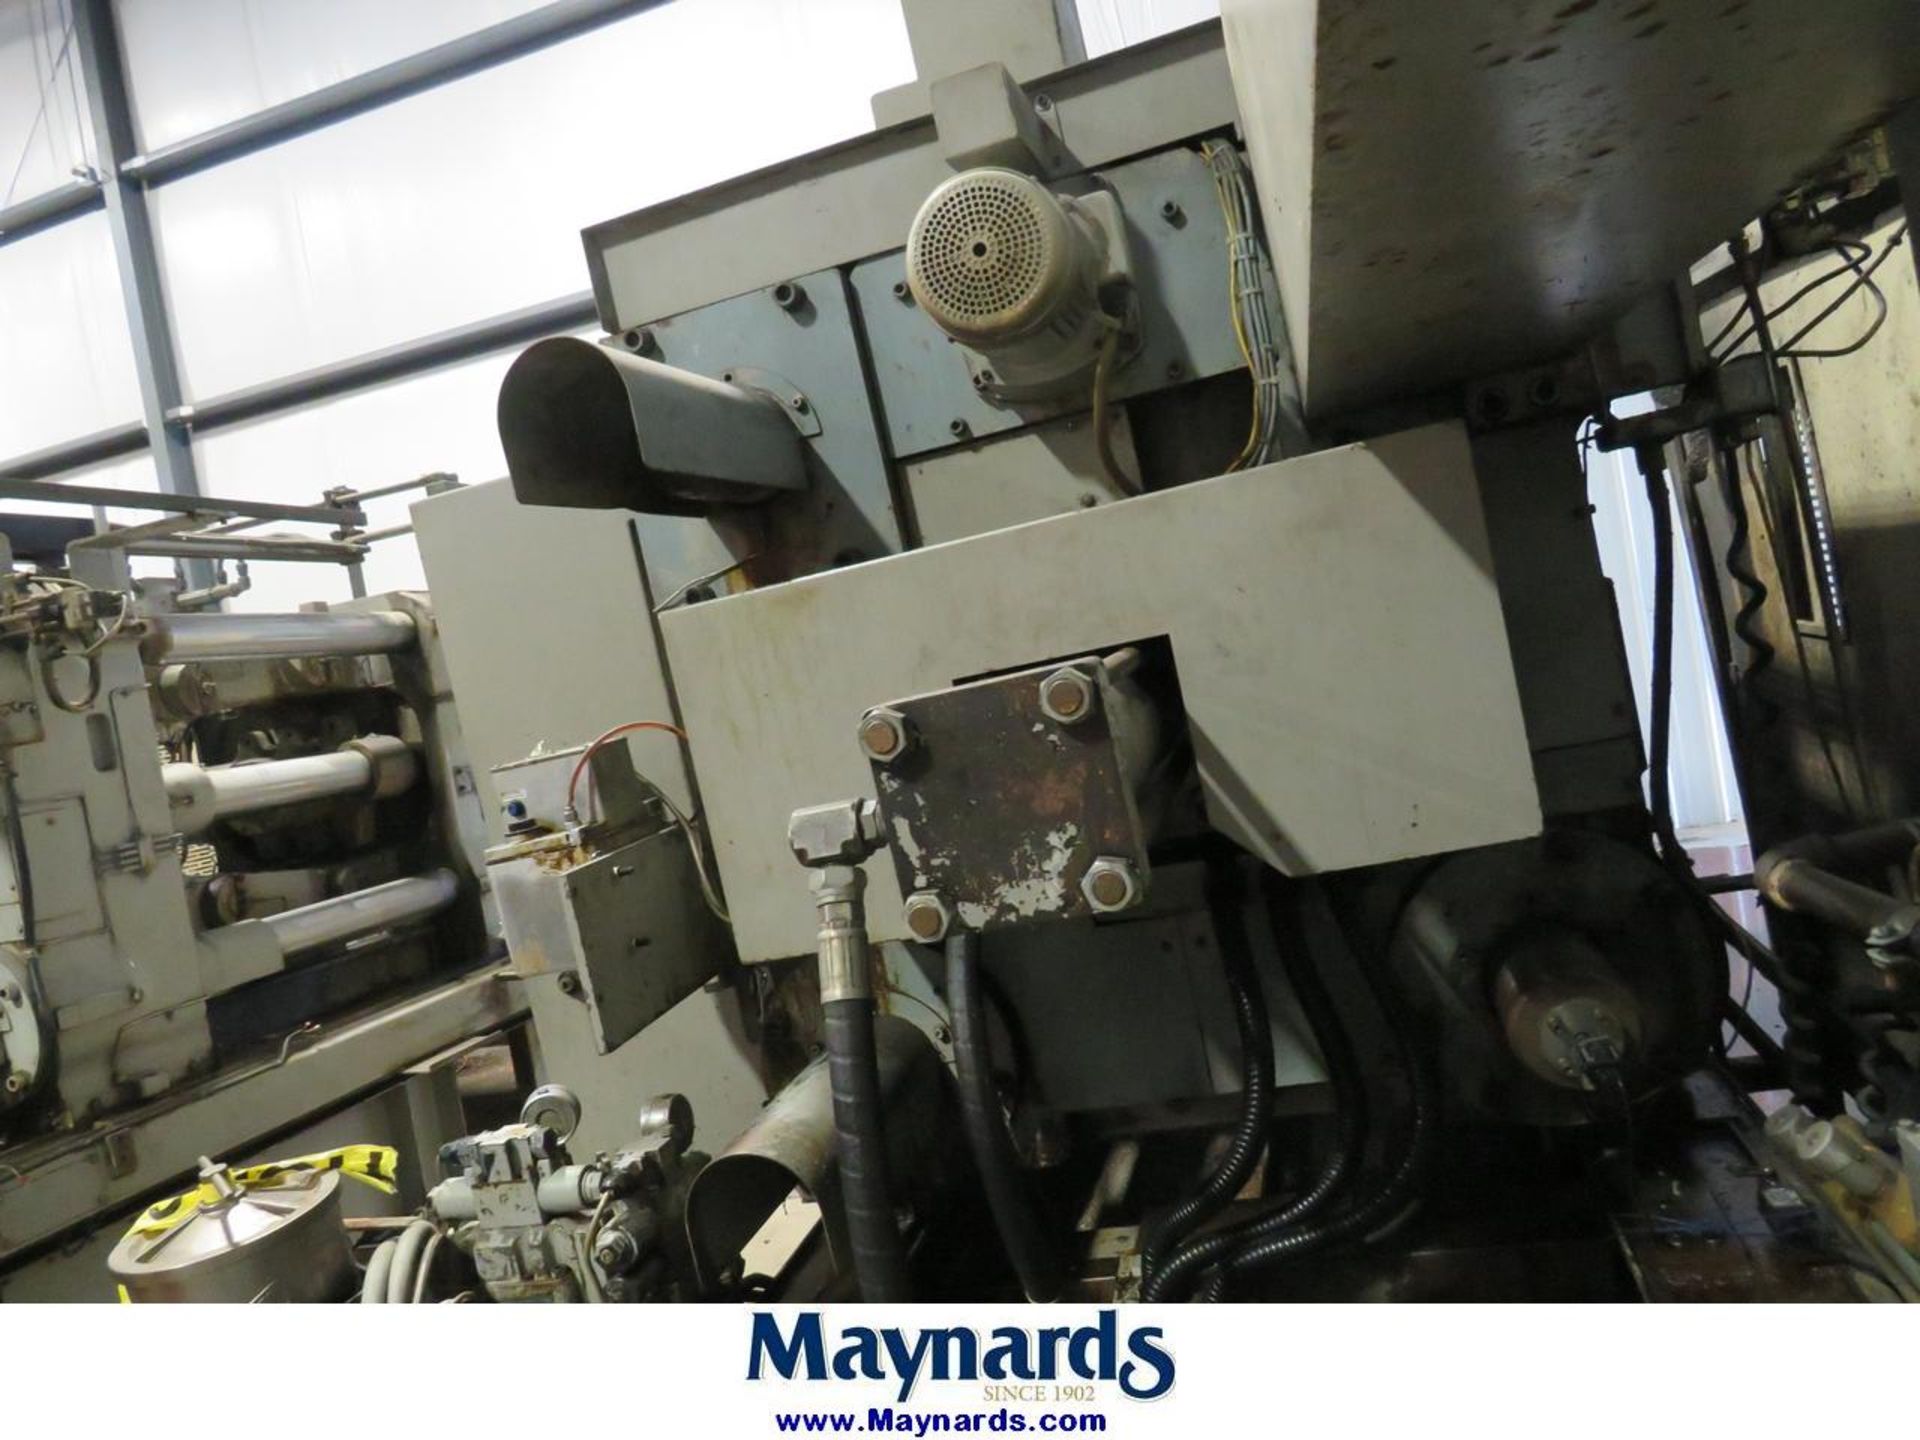 2006 Toyo BD-350V4-T 350 Ton Horizontal Cold Chamber Die Cast Press - Image 3 of 6